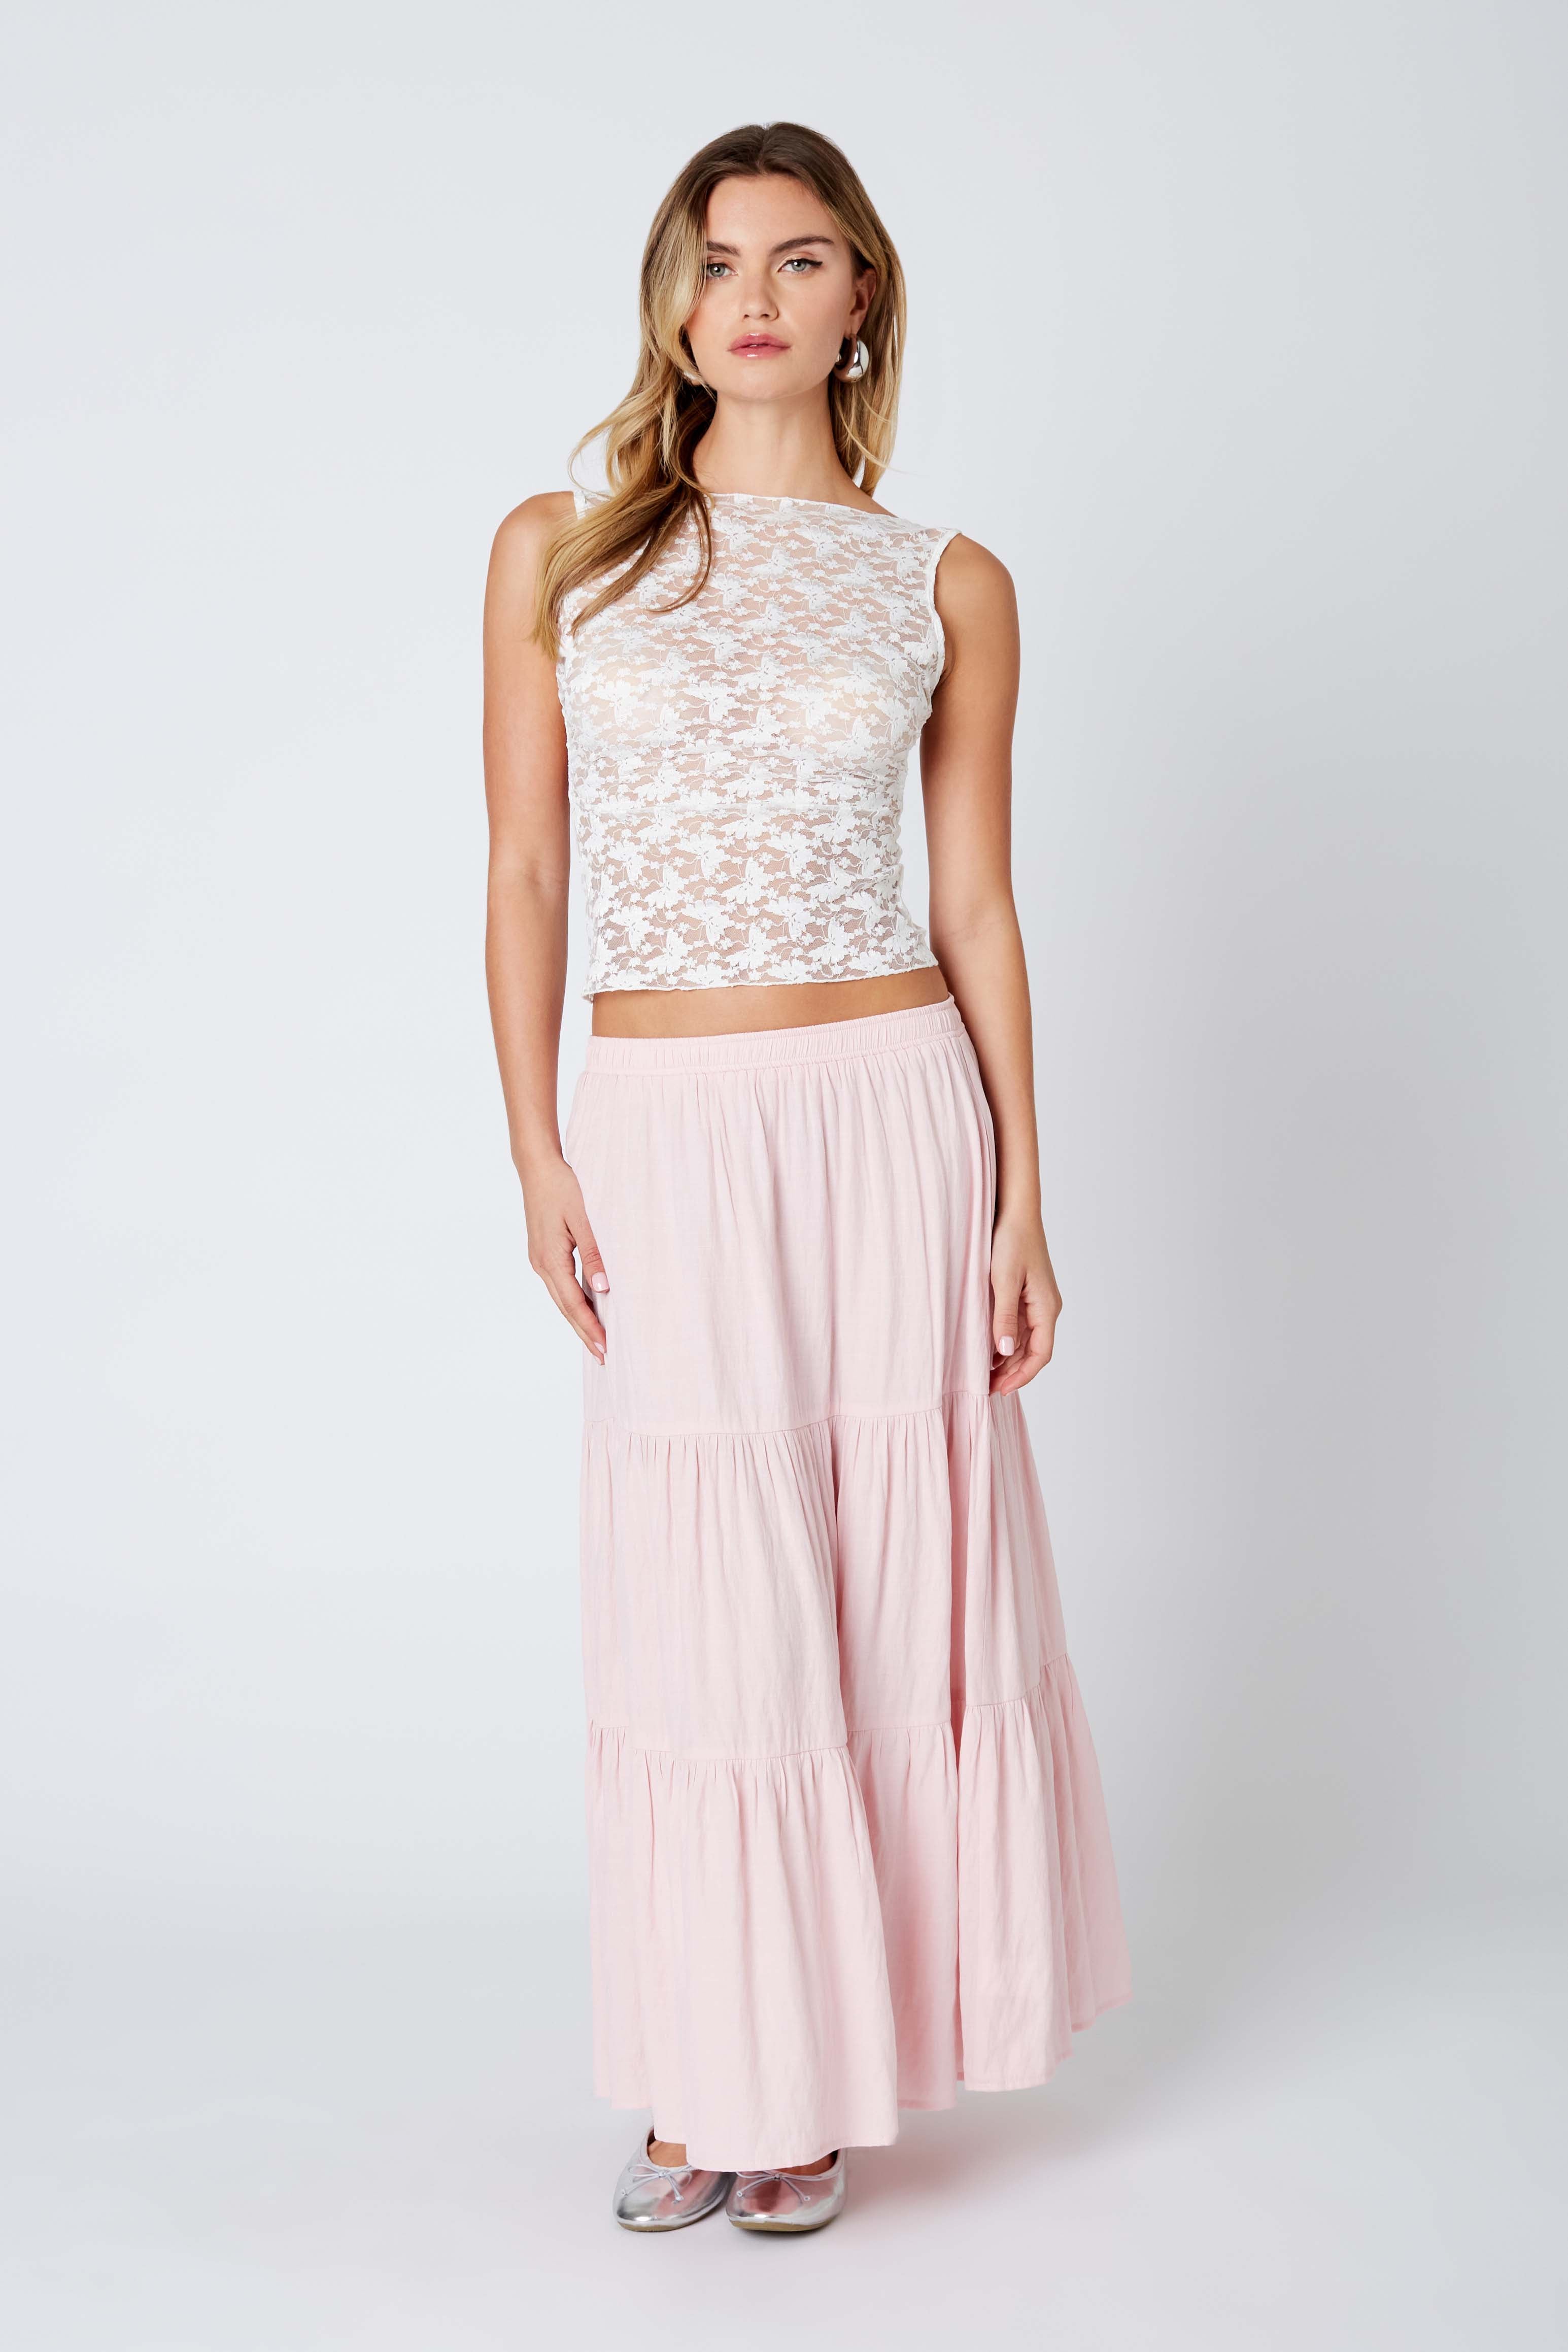 Tiered Maxi Skirt in Blush Front View